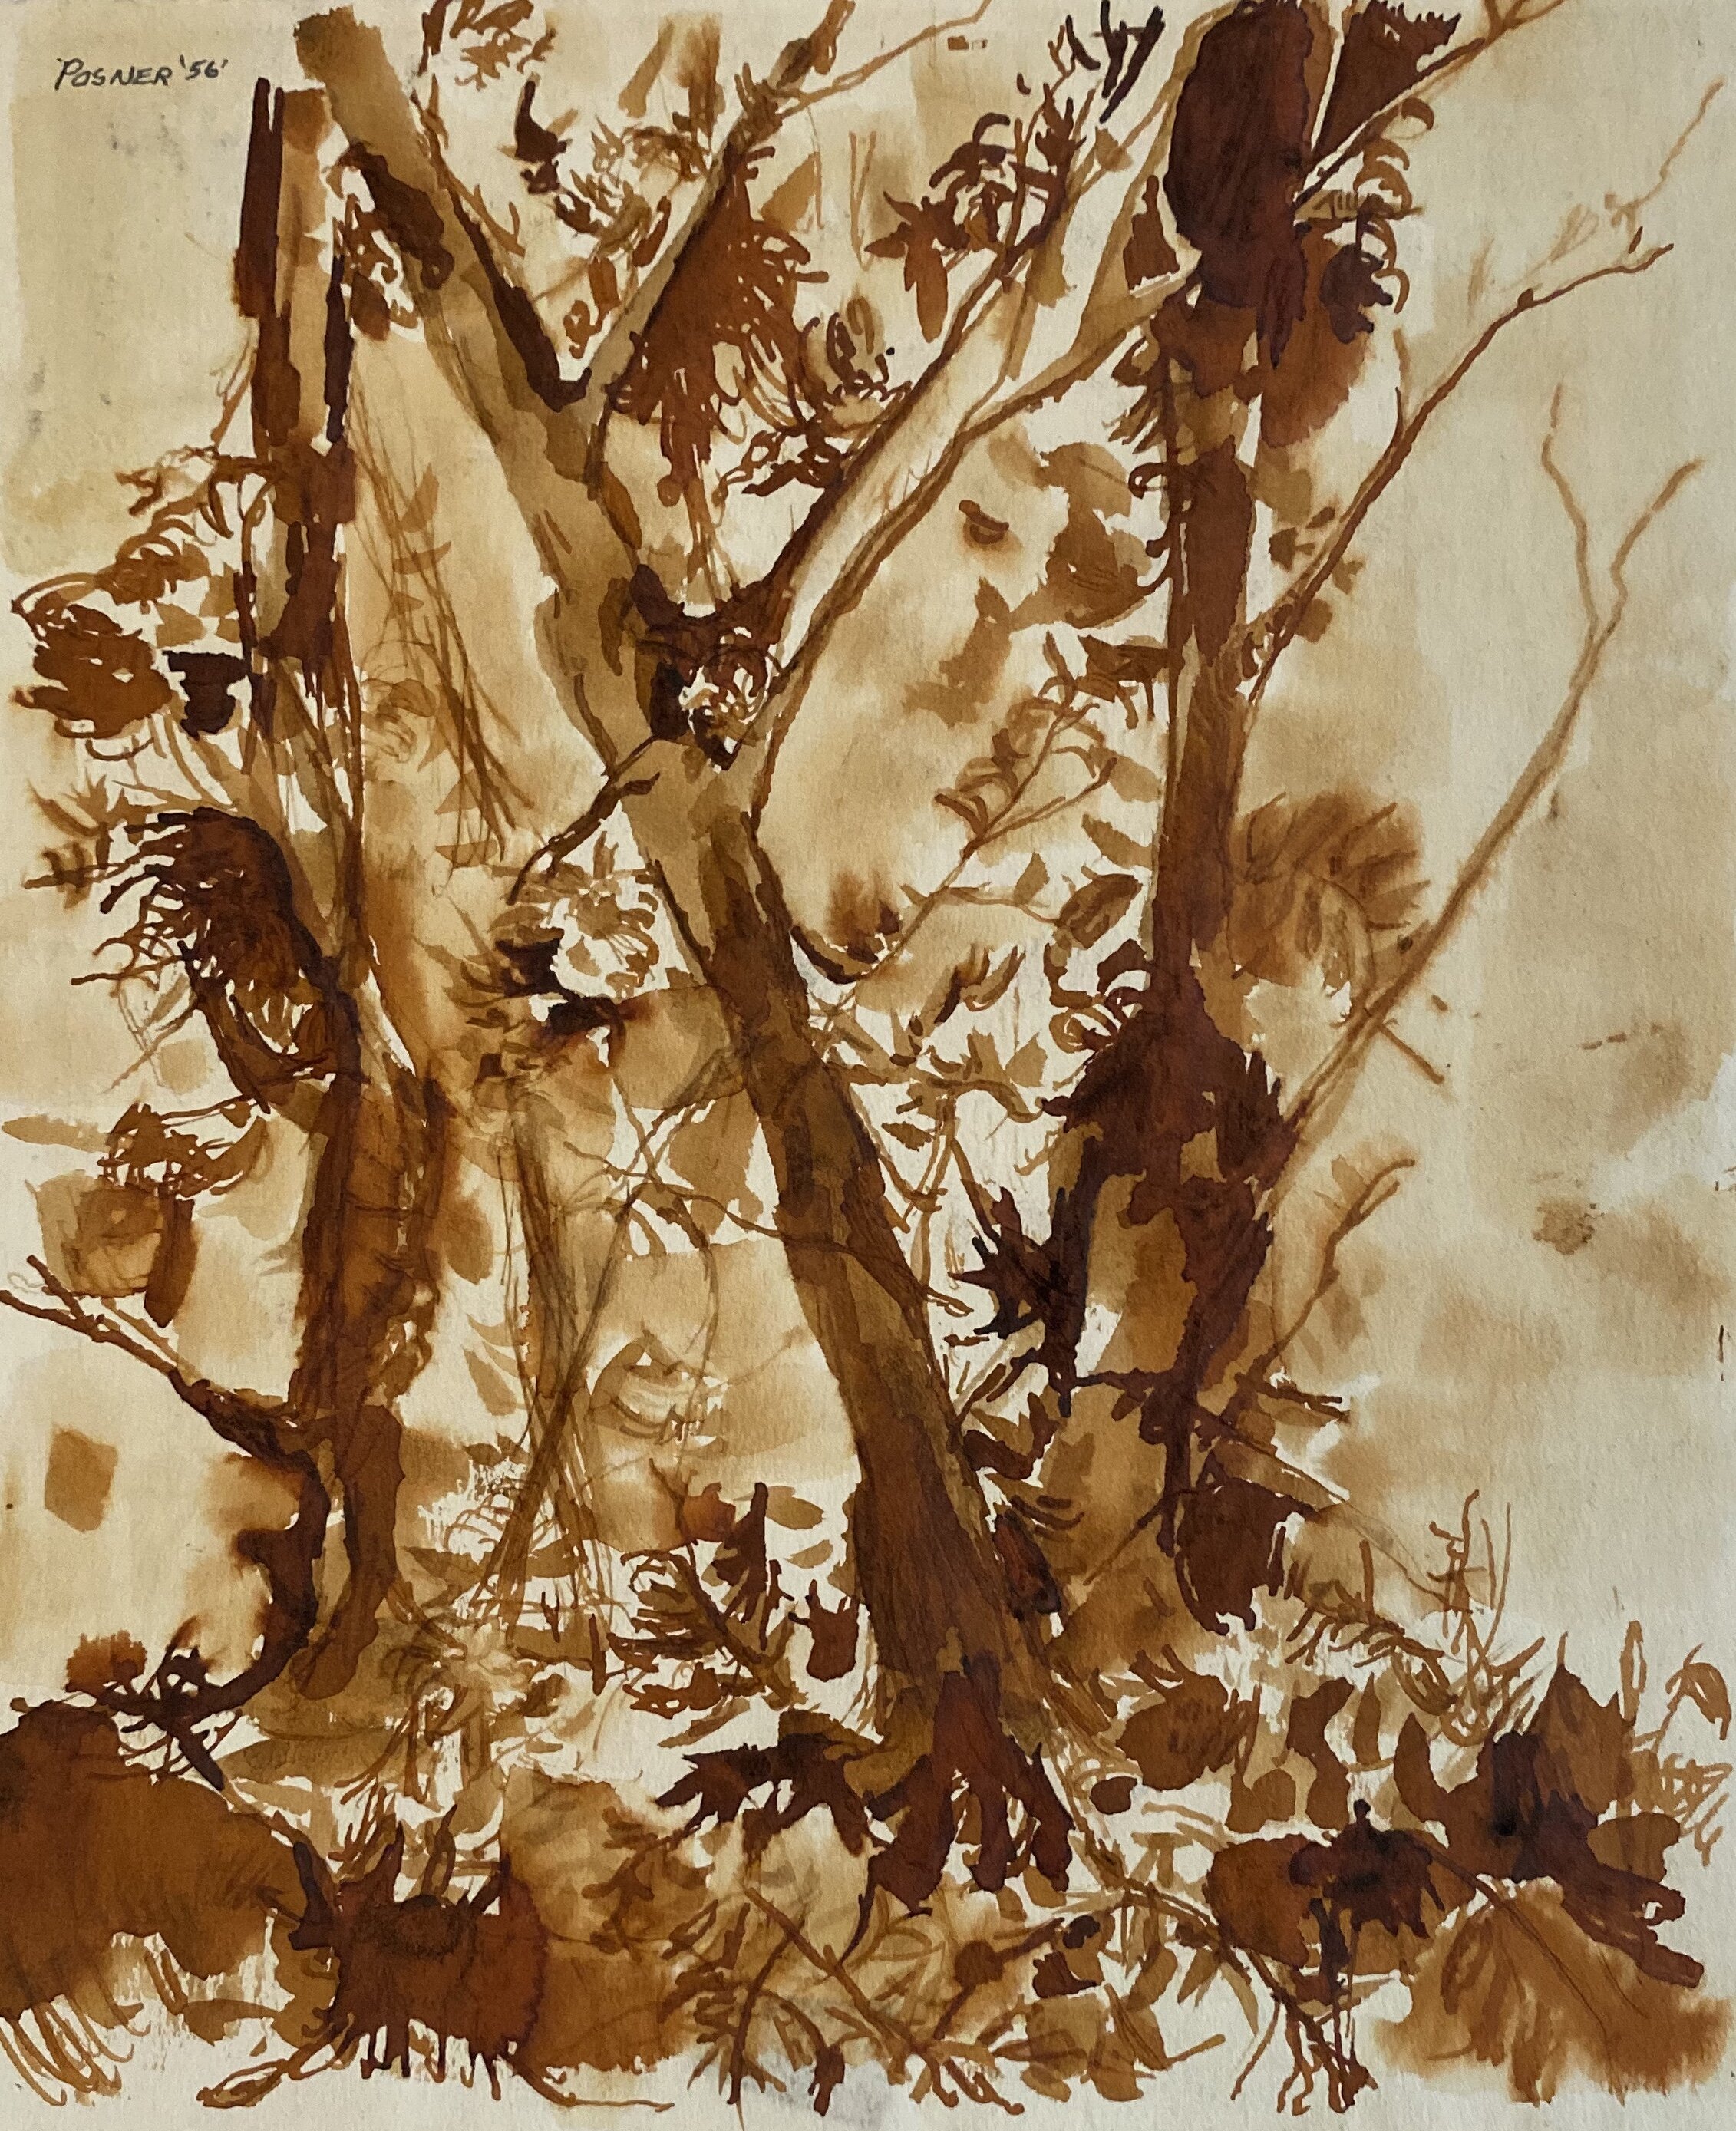   Description:  Forest in fall   Medium:  Ink on paper   Dimensions:   H: 8 in W: 7 in 